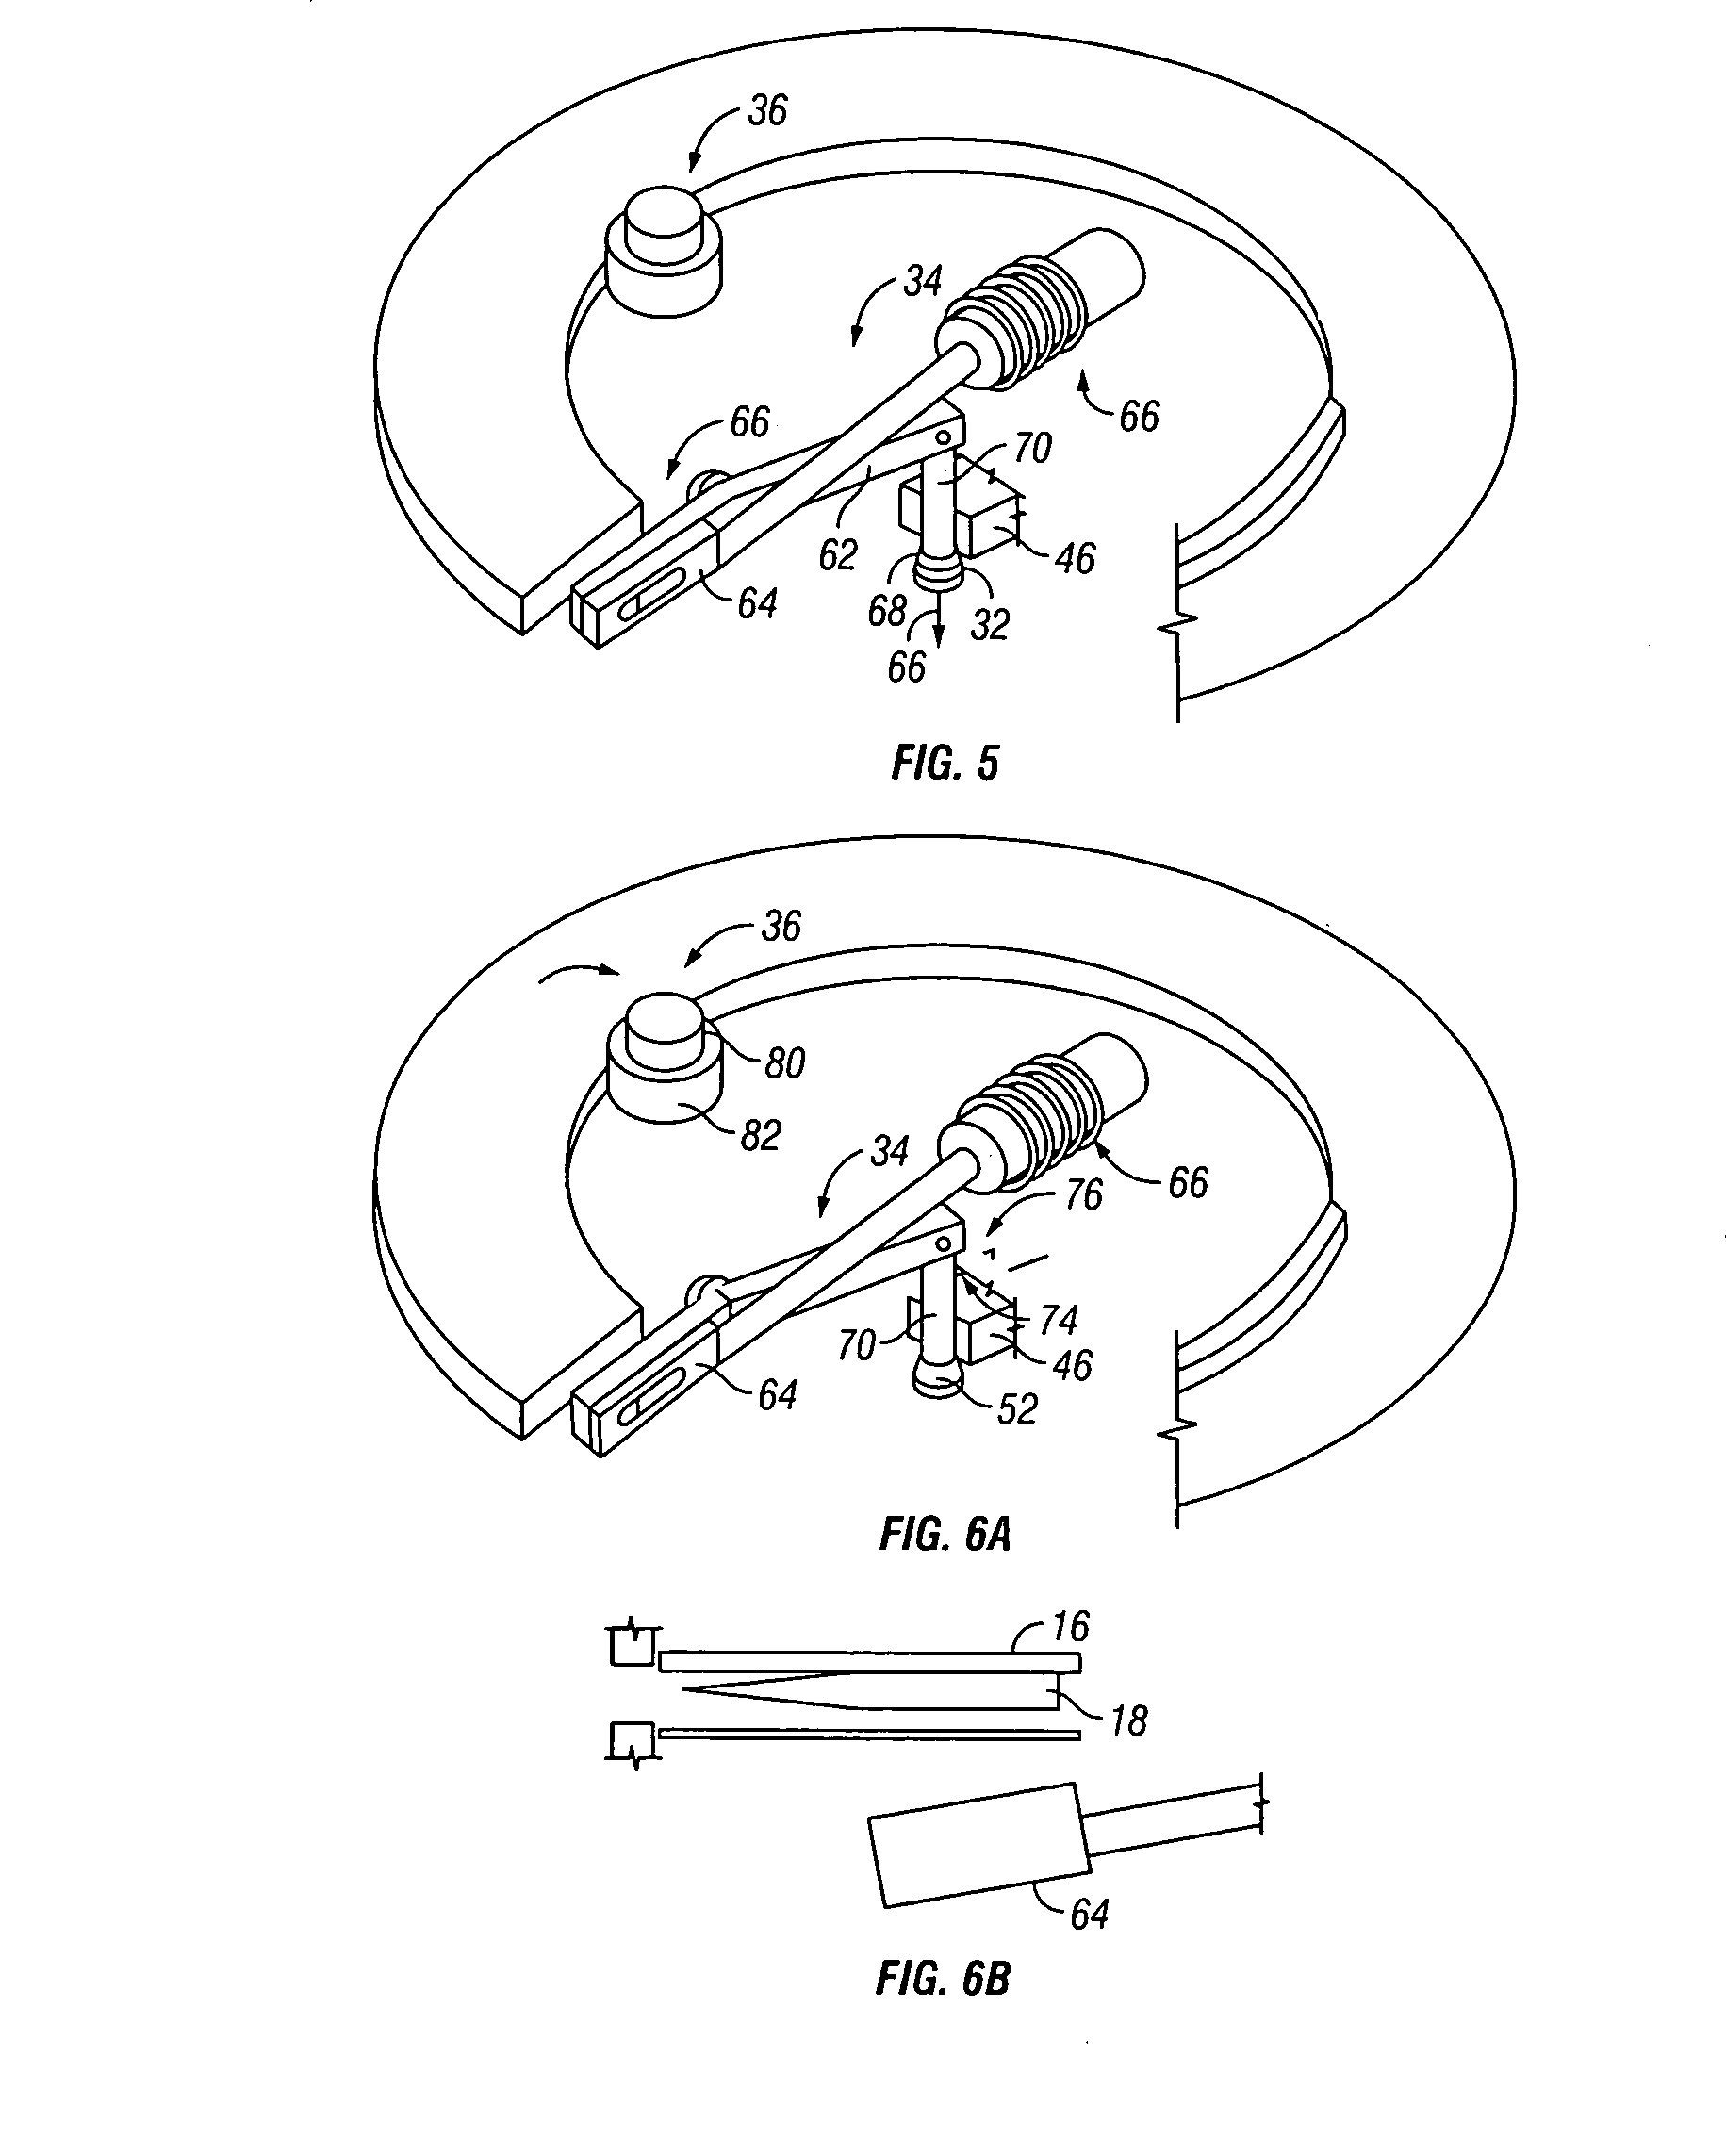 Method and apparatus for a multi-use body fluid sampling device with sterility barrier release